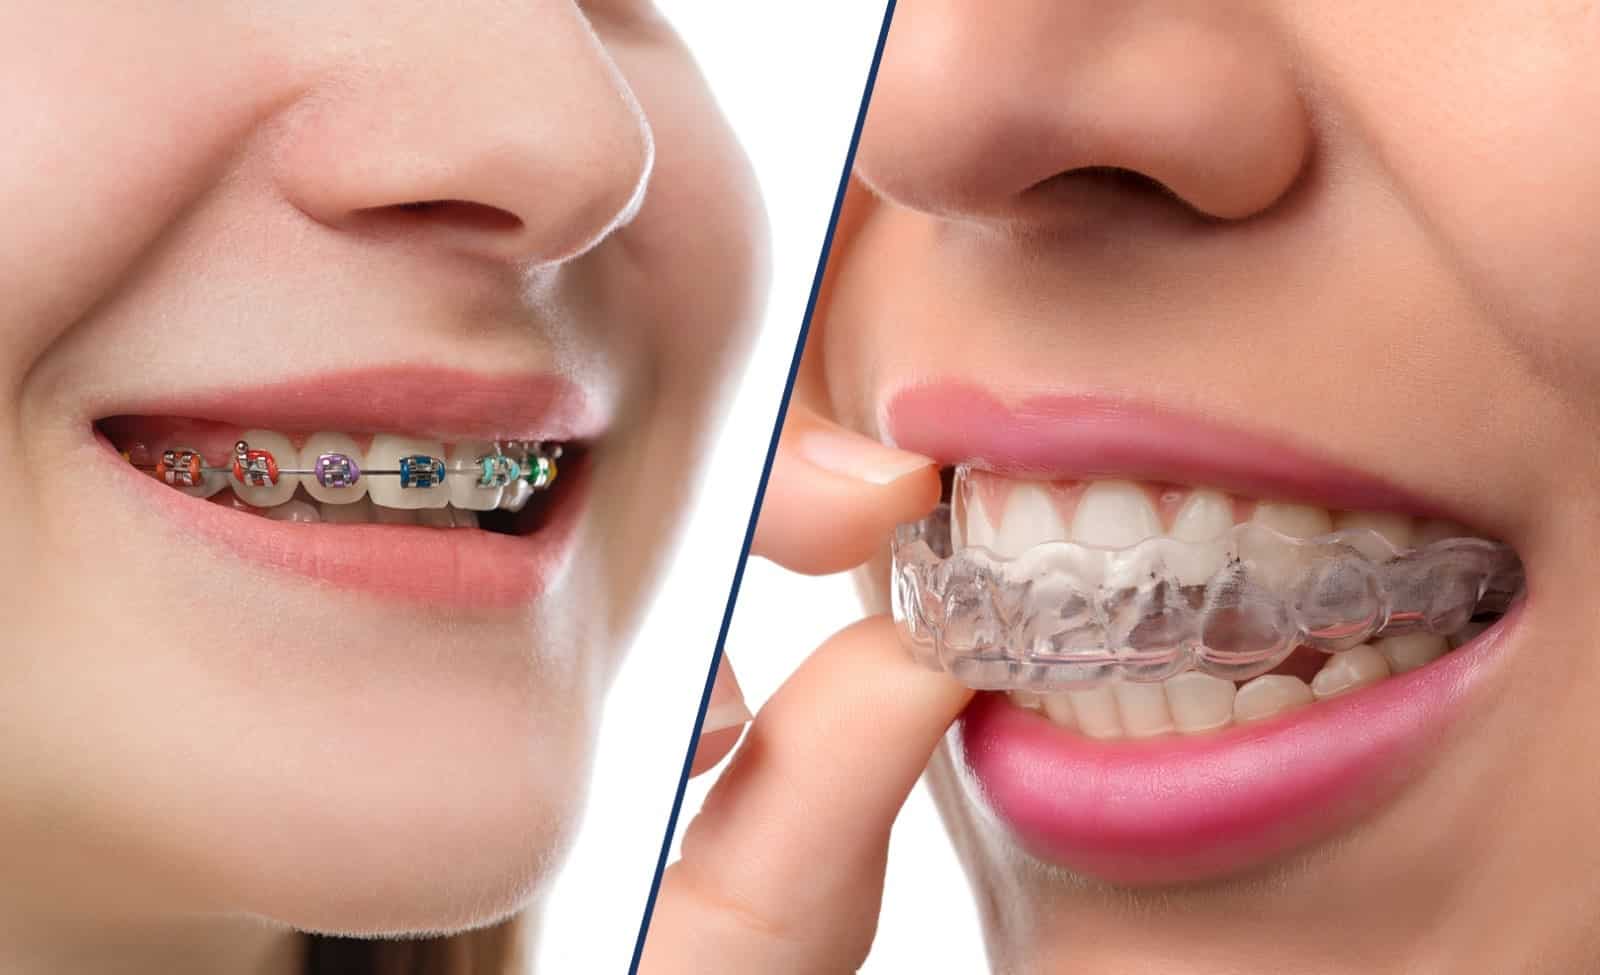 Comparison between braces and invisalign